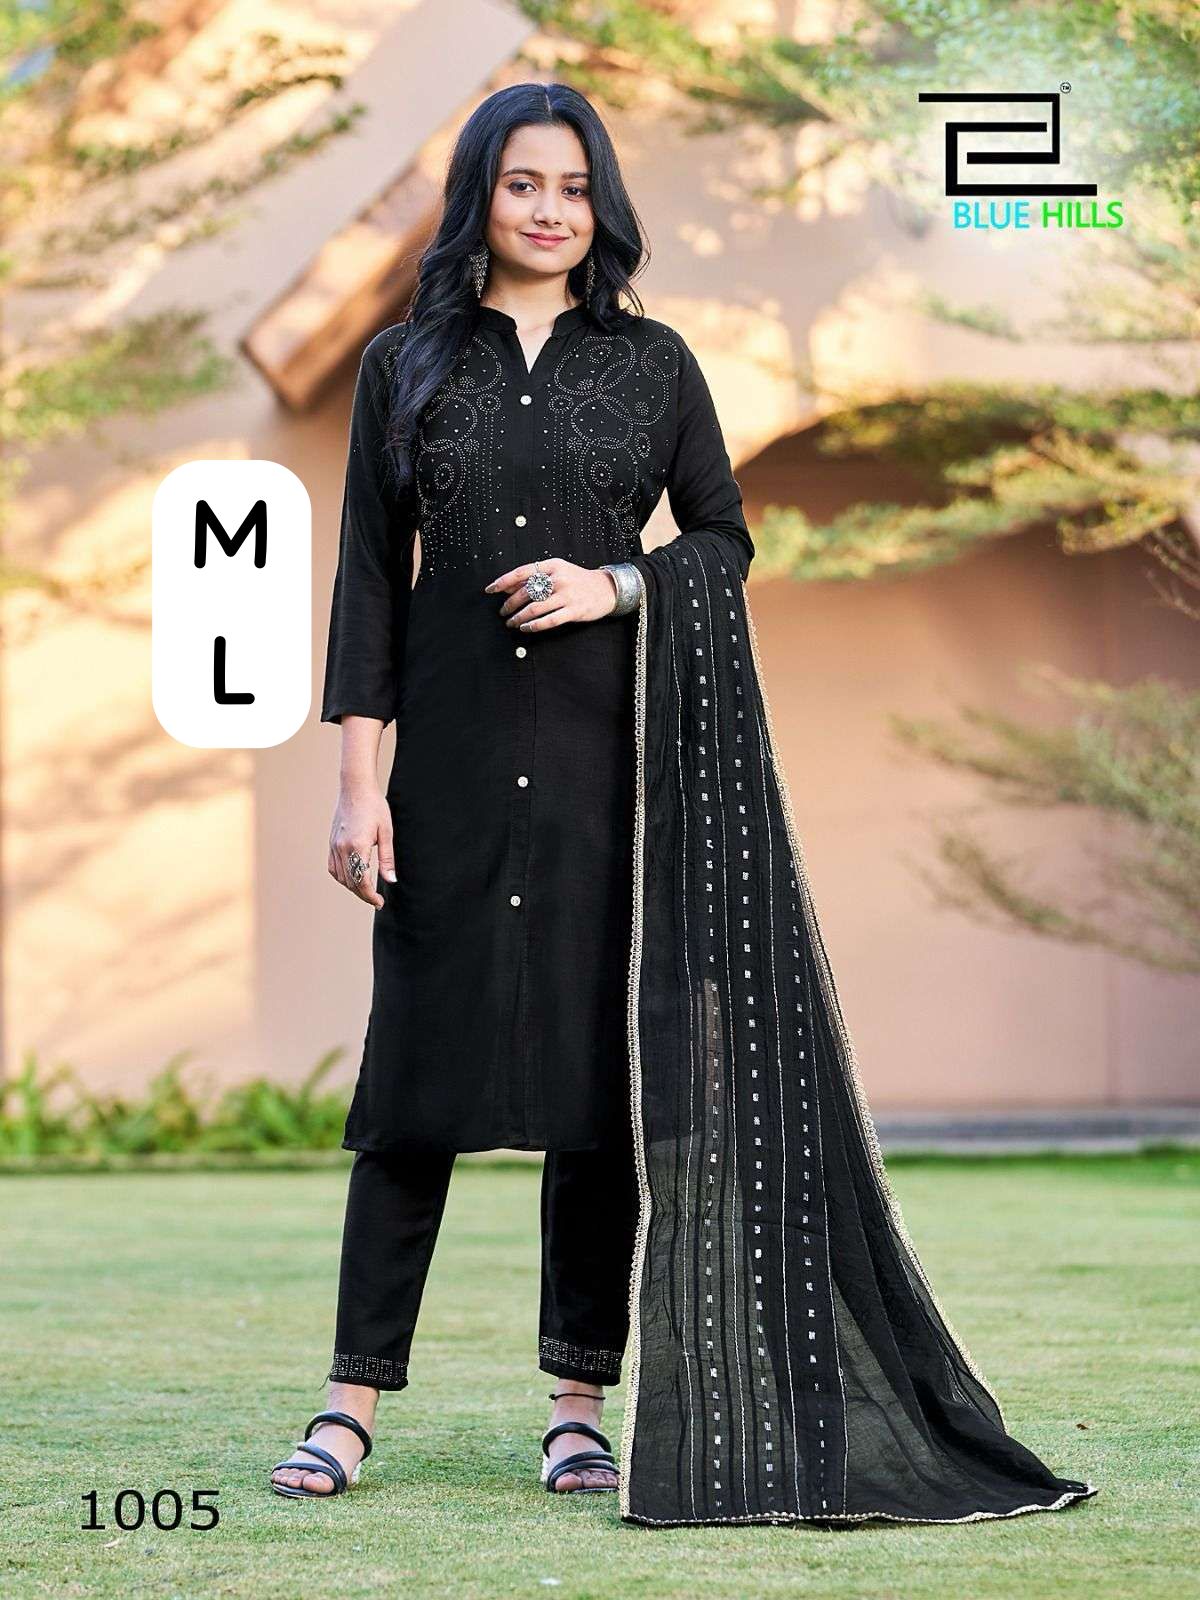 Moonlight Bluehills Rayon Readymade Pant Style Suits